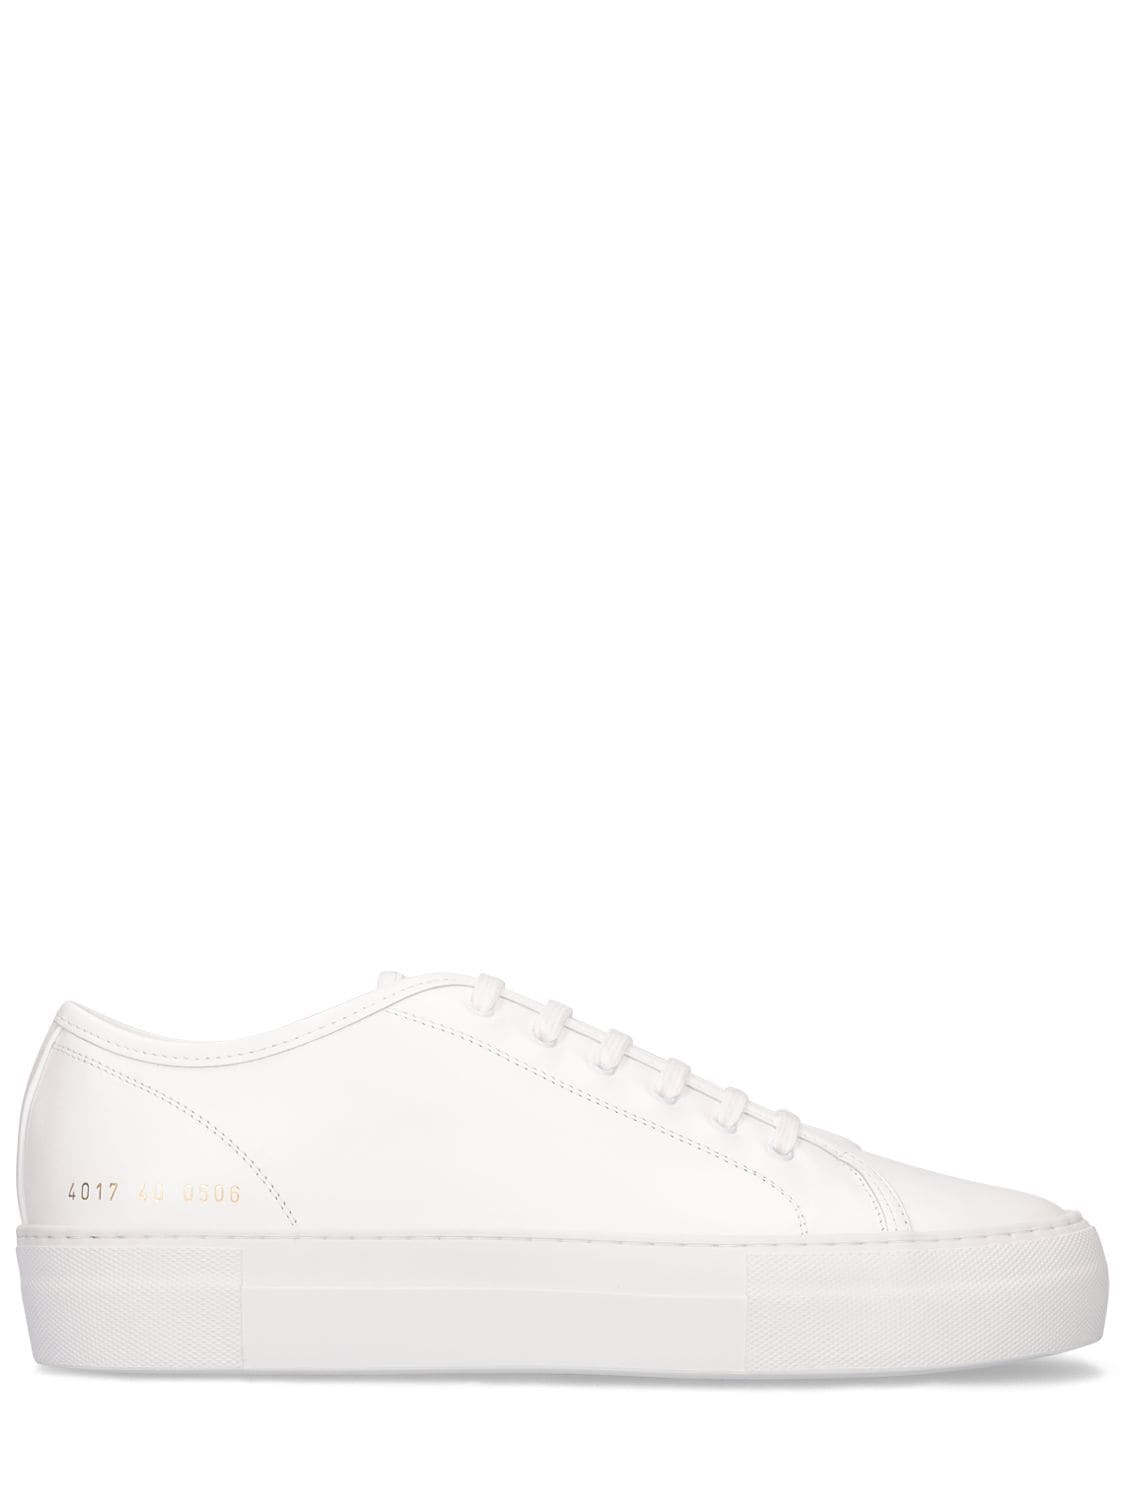 Tournament Super Low Leather Sneakers - COMMON PROJECTS - Modalova